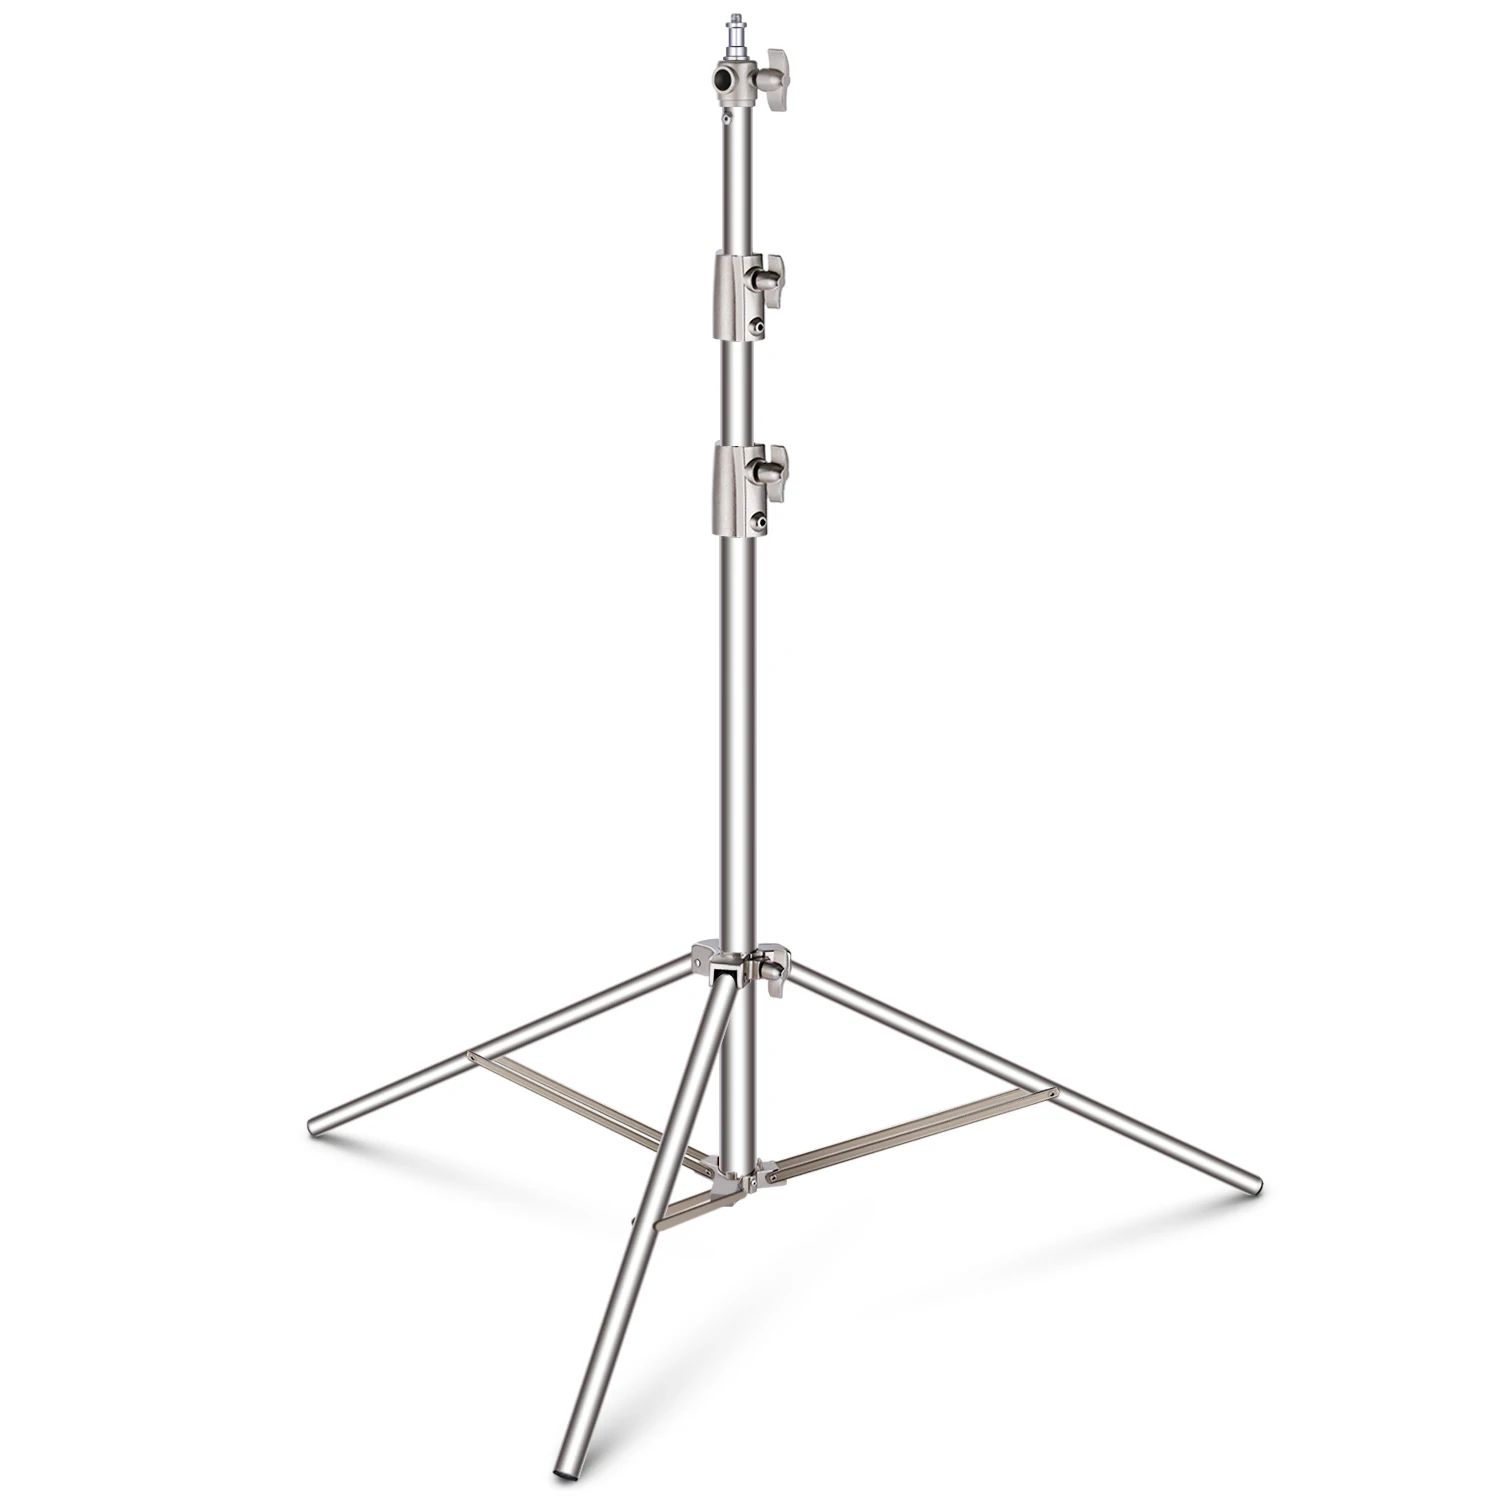 

Neewer Stainless Steel Light Stand 102 inches/260 cm Heavy Duty for Studio Softbox, Monolight and Other Photographic Equipment